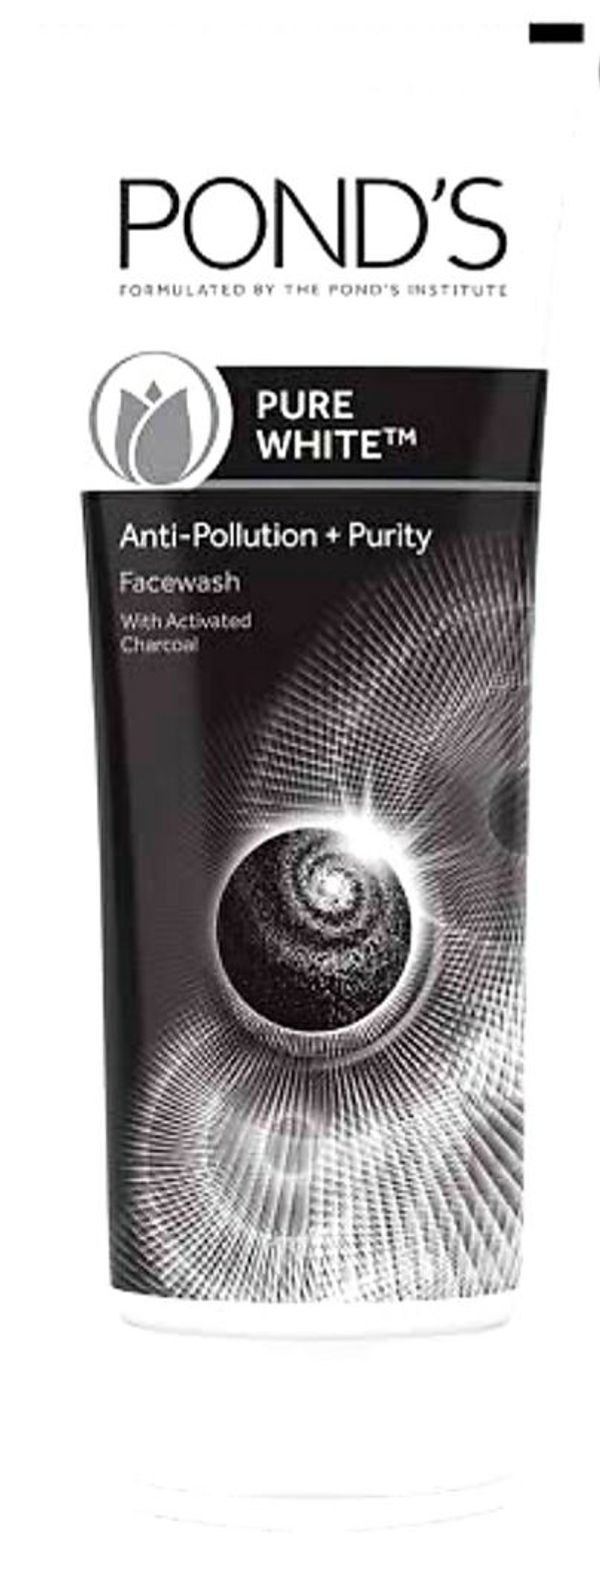 PONDS POND's Pure Detox Anti-Pollution Purity With Activated Charcoal Face Wash